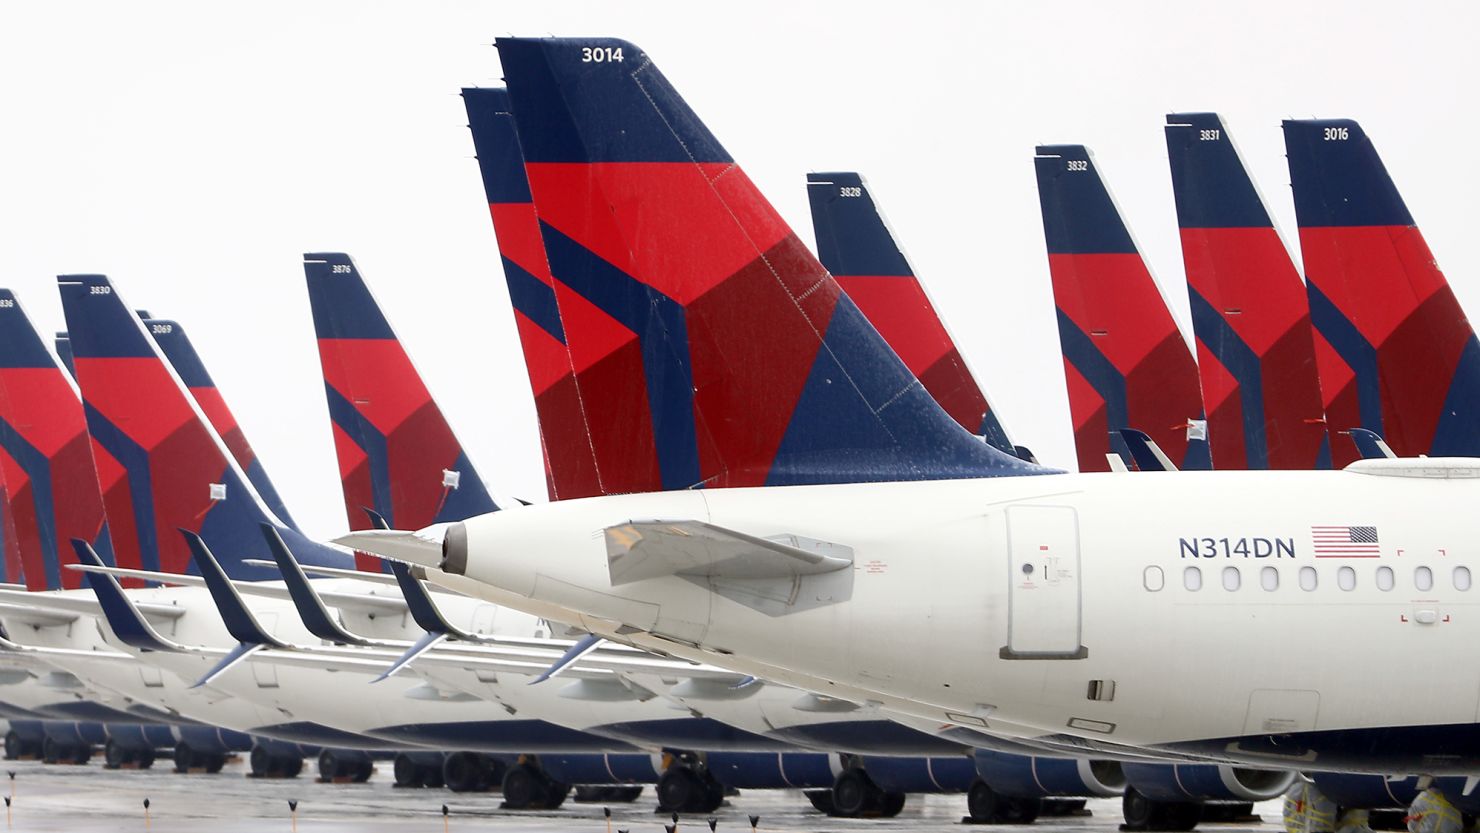 Planes belonging to Delta Airlines sit idle at Kansas City International Airport on April 03, 2020 in Kansas City, Missouri. U.S. carriers reported an enormous drop in bookings amid the spread of the coronavirus and are waiting for a government bailout to fight the impact. Delta lost almost $2 billion in March and parked half of its fleet in order to save money. (Photo by Jamie Squire/Getty Images)